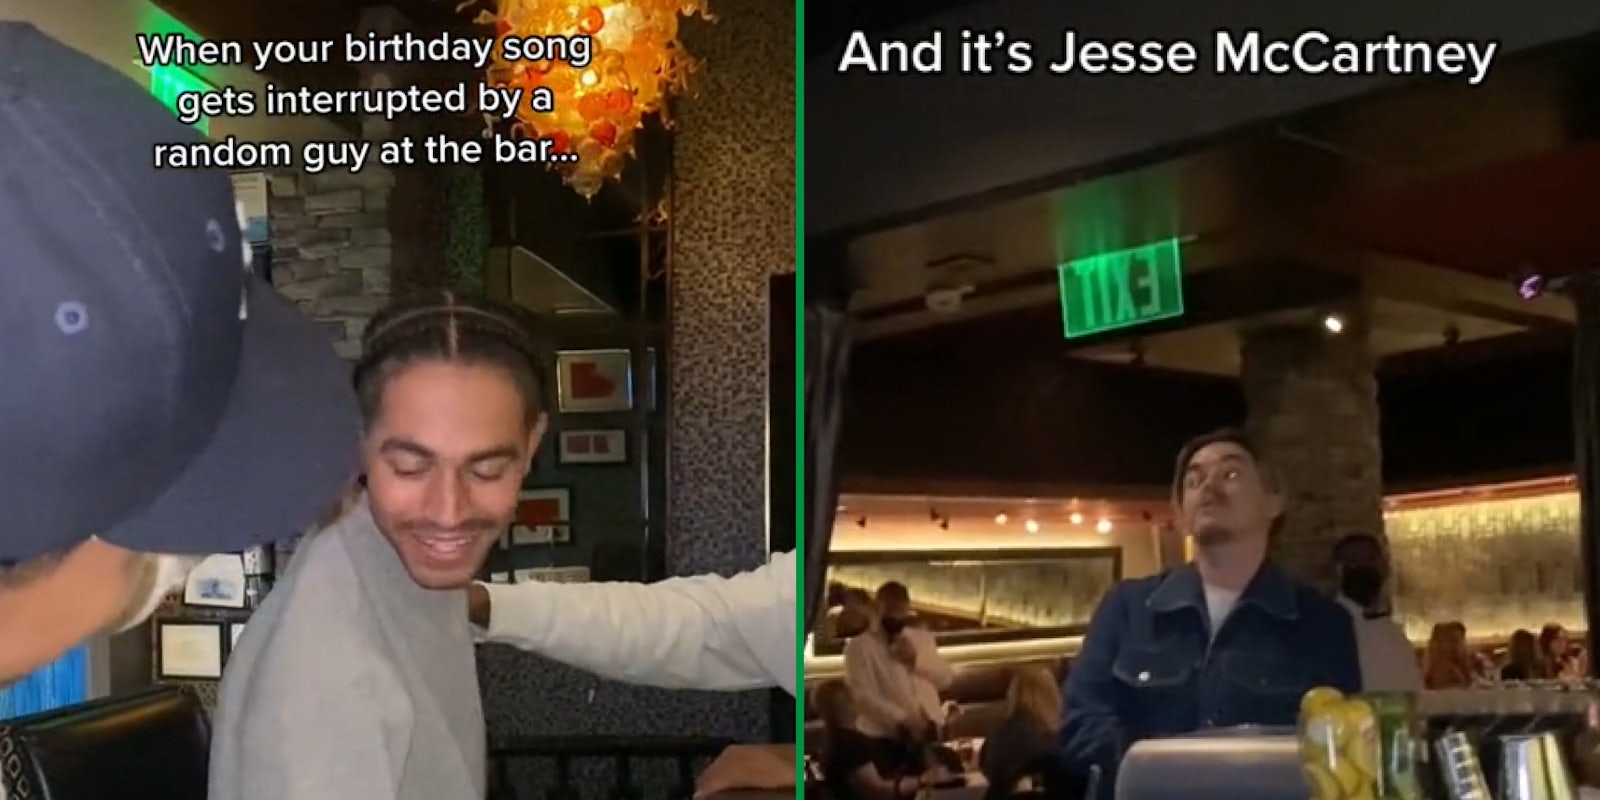 Man smiling friend hand on shoulder caption 'When your birthday song gets interrupted by a random guy at the bar...' (l) Jesse McCartney at bar singing caption ' and its Jesse McCartney' (r)